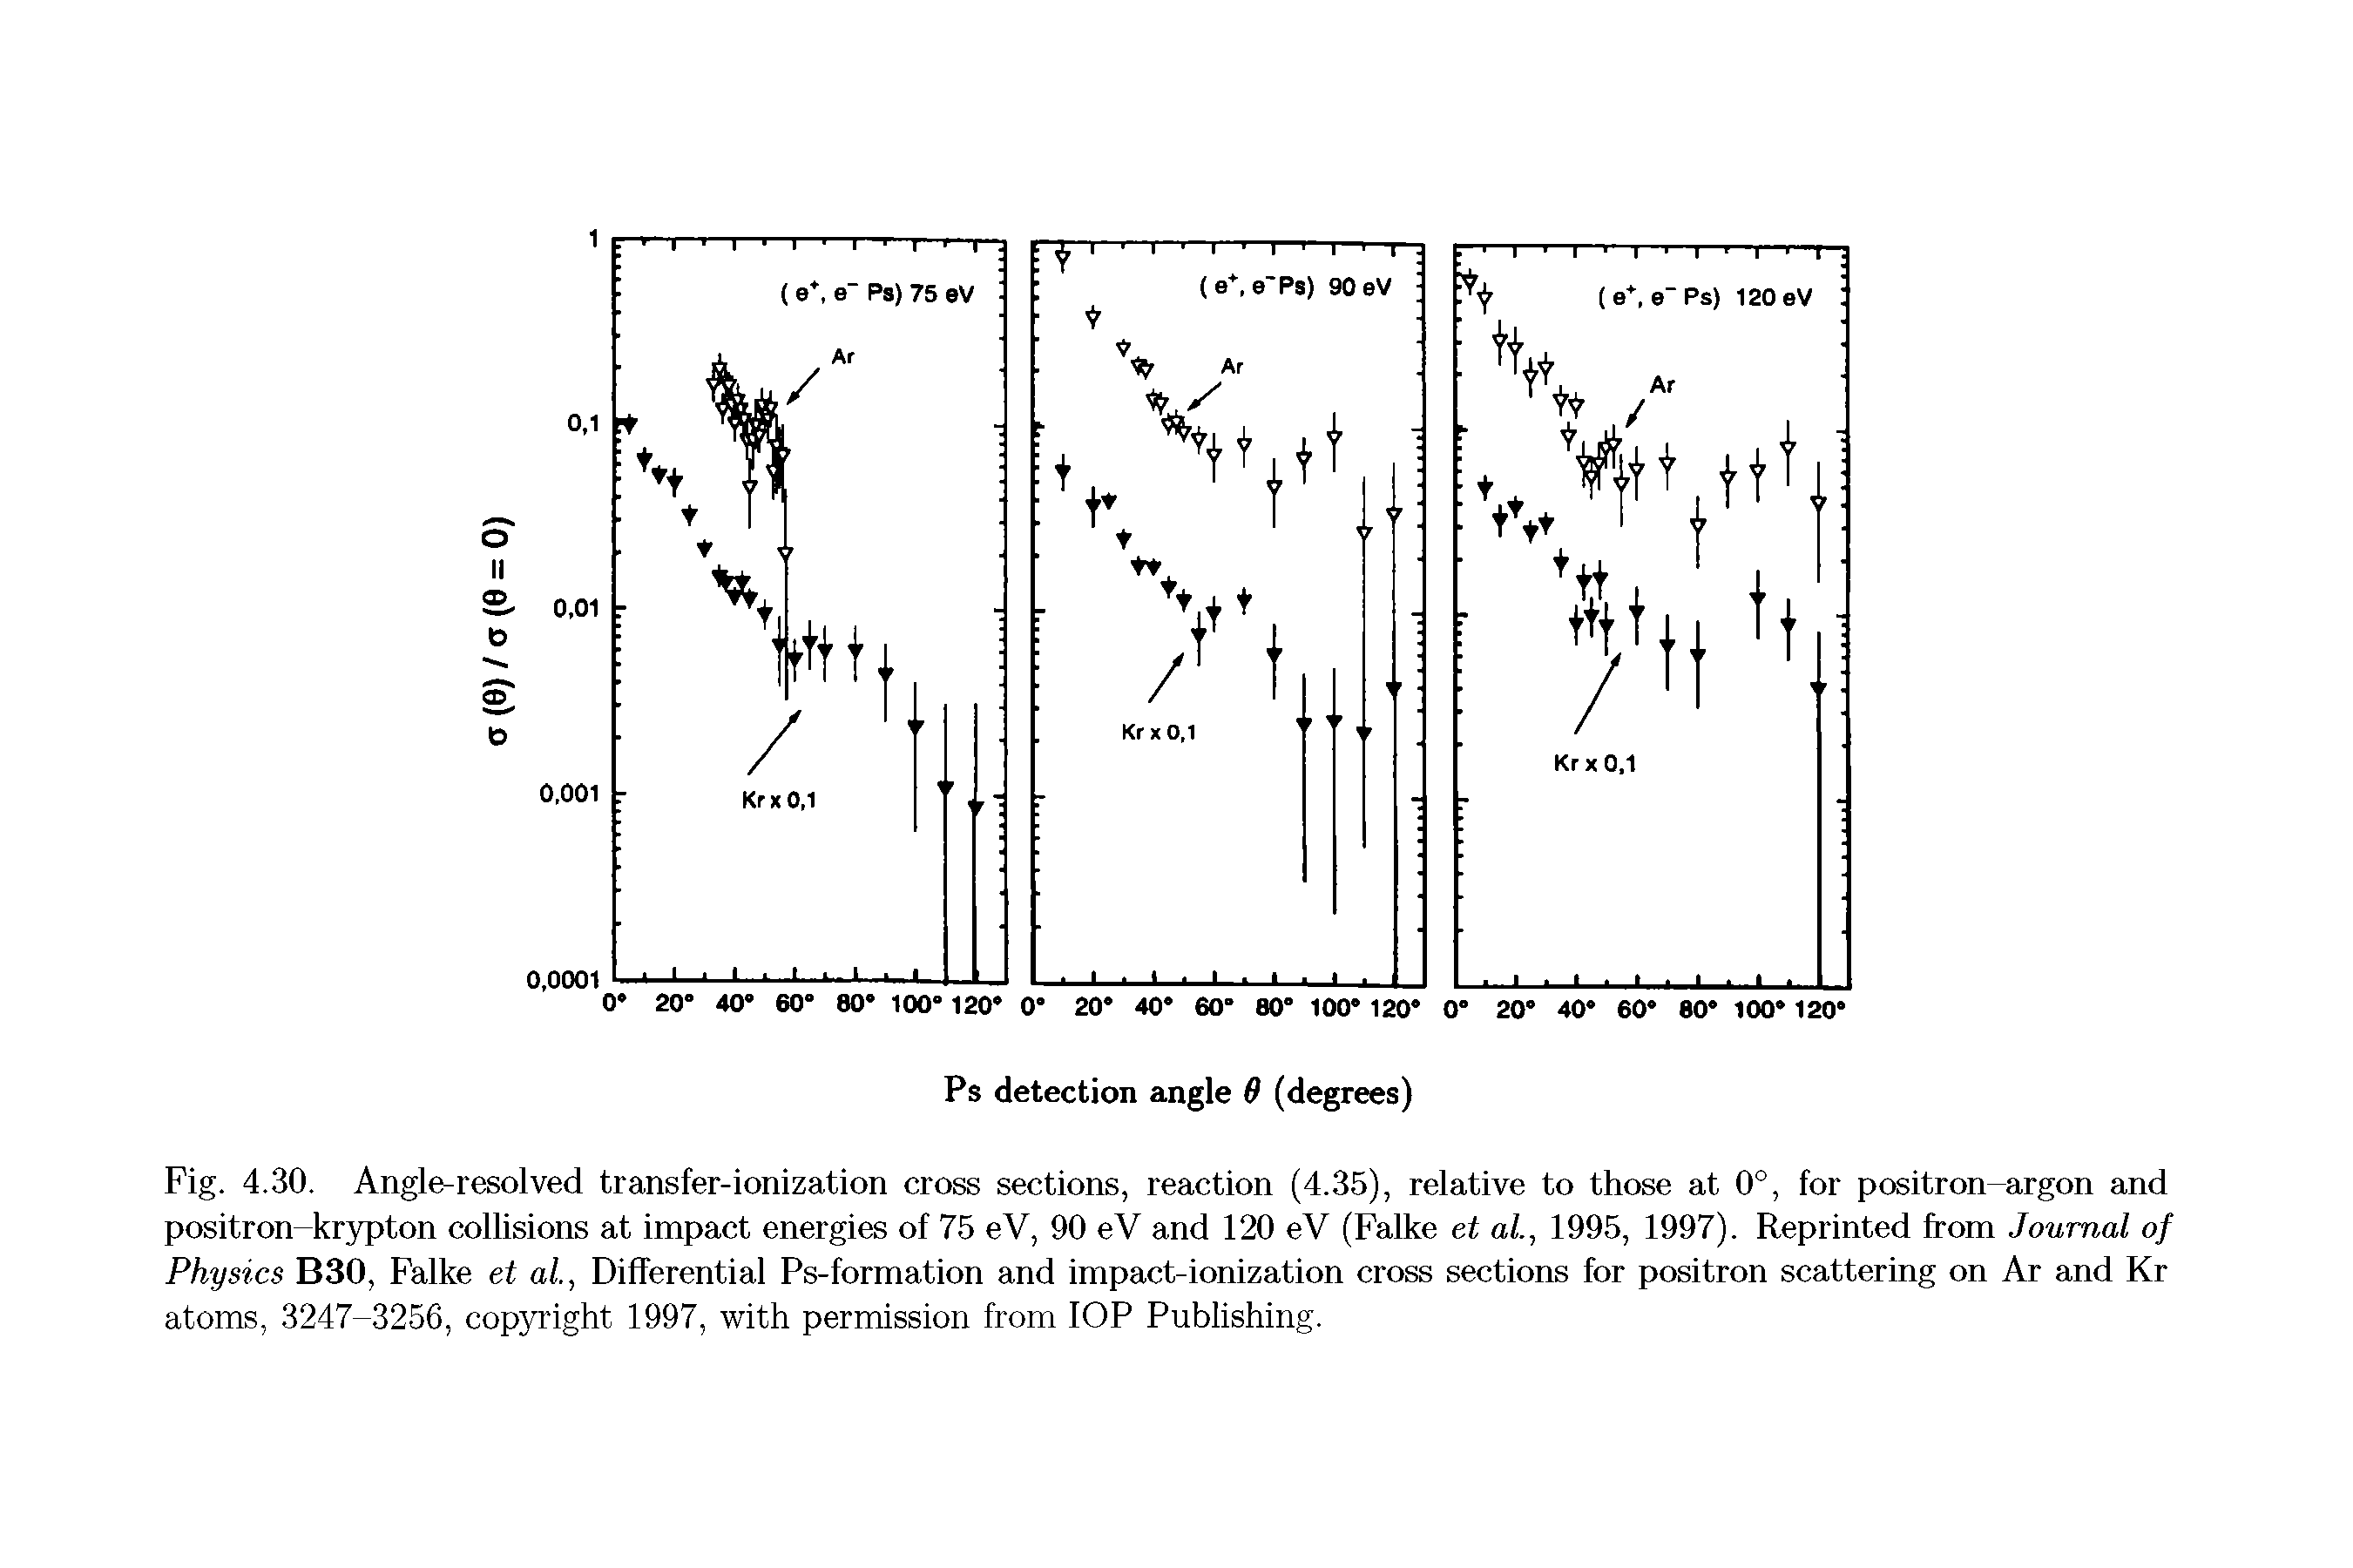 Fig. 4.30. Angle-resolved transfer-ionization cross sections, reaction (4.35), relative to those at 0°, for positron-argon and positron-krypton collisions at impact energies of 75 eV, 90 eV and 120 eV (Falke et at, 1995, 1997). Reprinted from Journal of Physics B30, Falke et al., Differential Ps-formation and impact-ionization cross sections for positron scattering on Ar and Kr atoms, 3247-3256, copyright 1997, with permission from 10P Publishing.